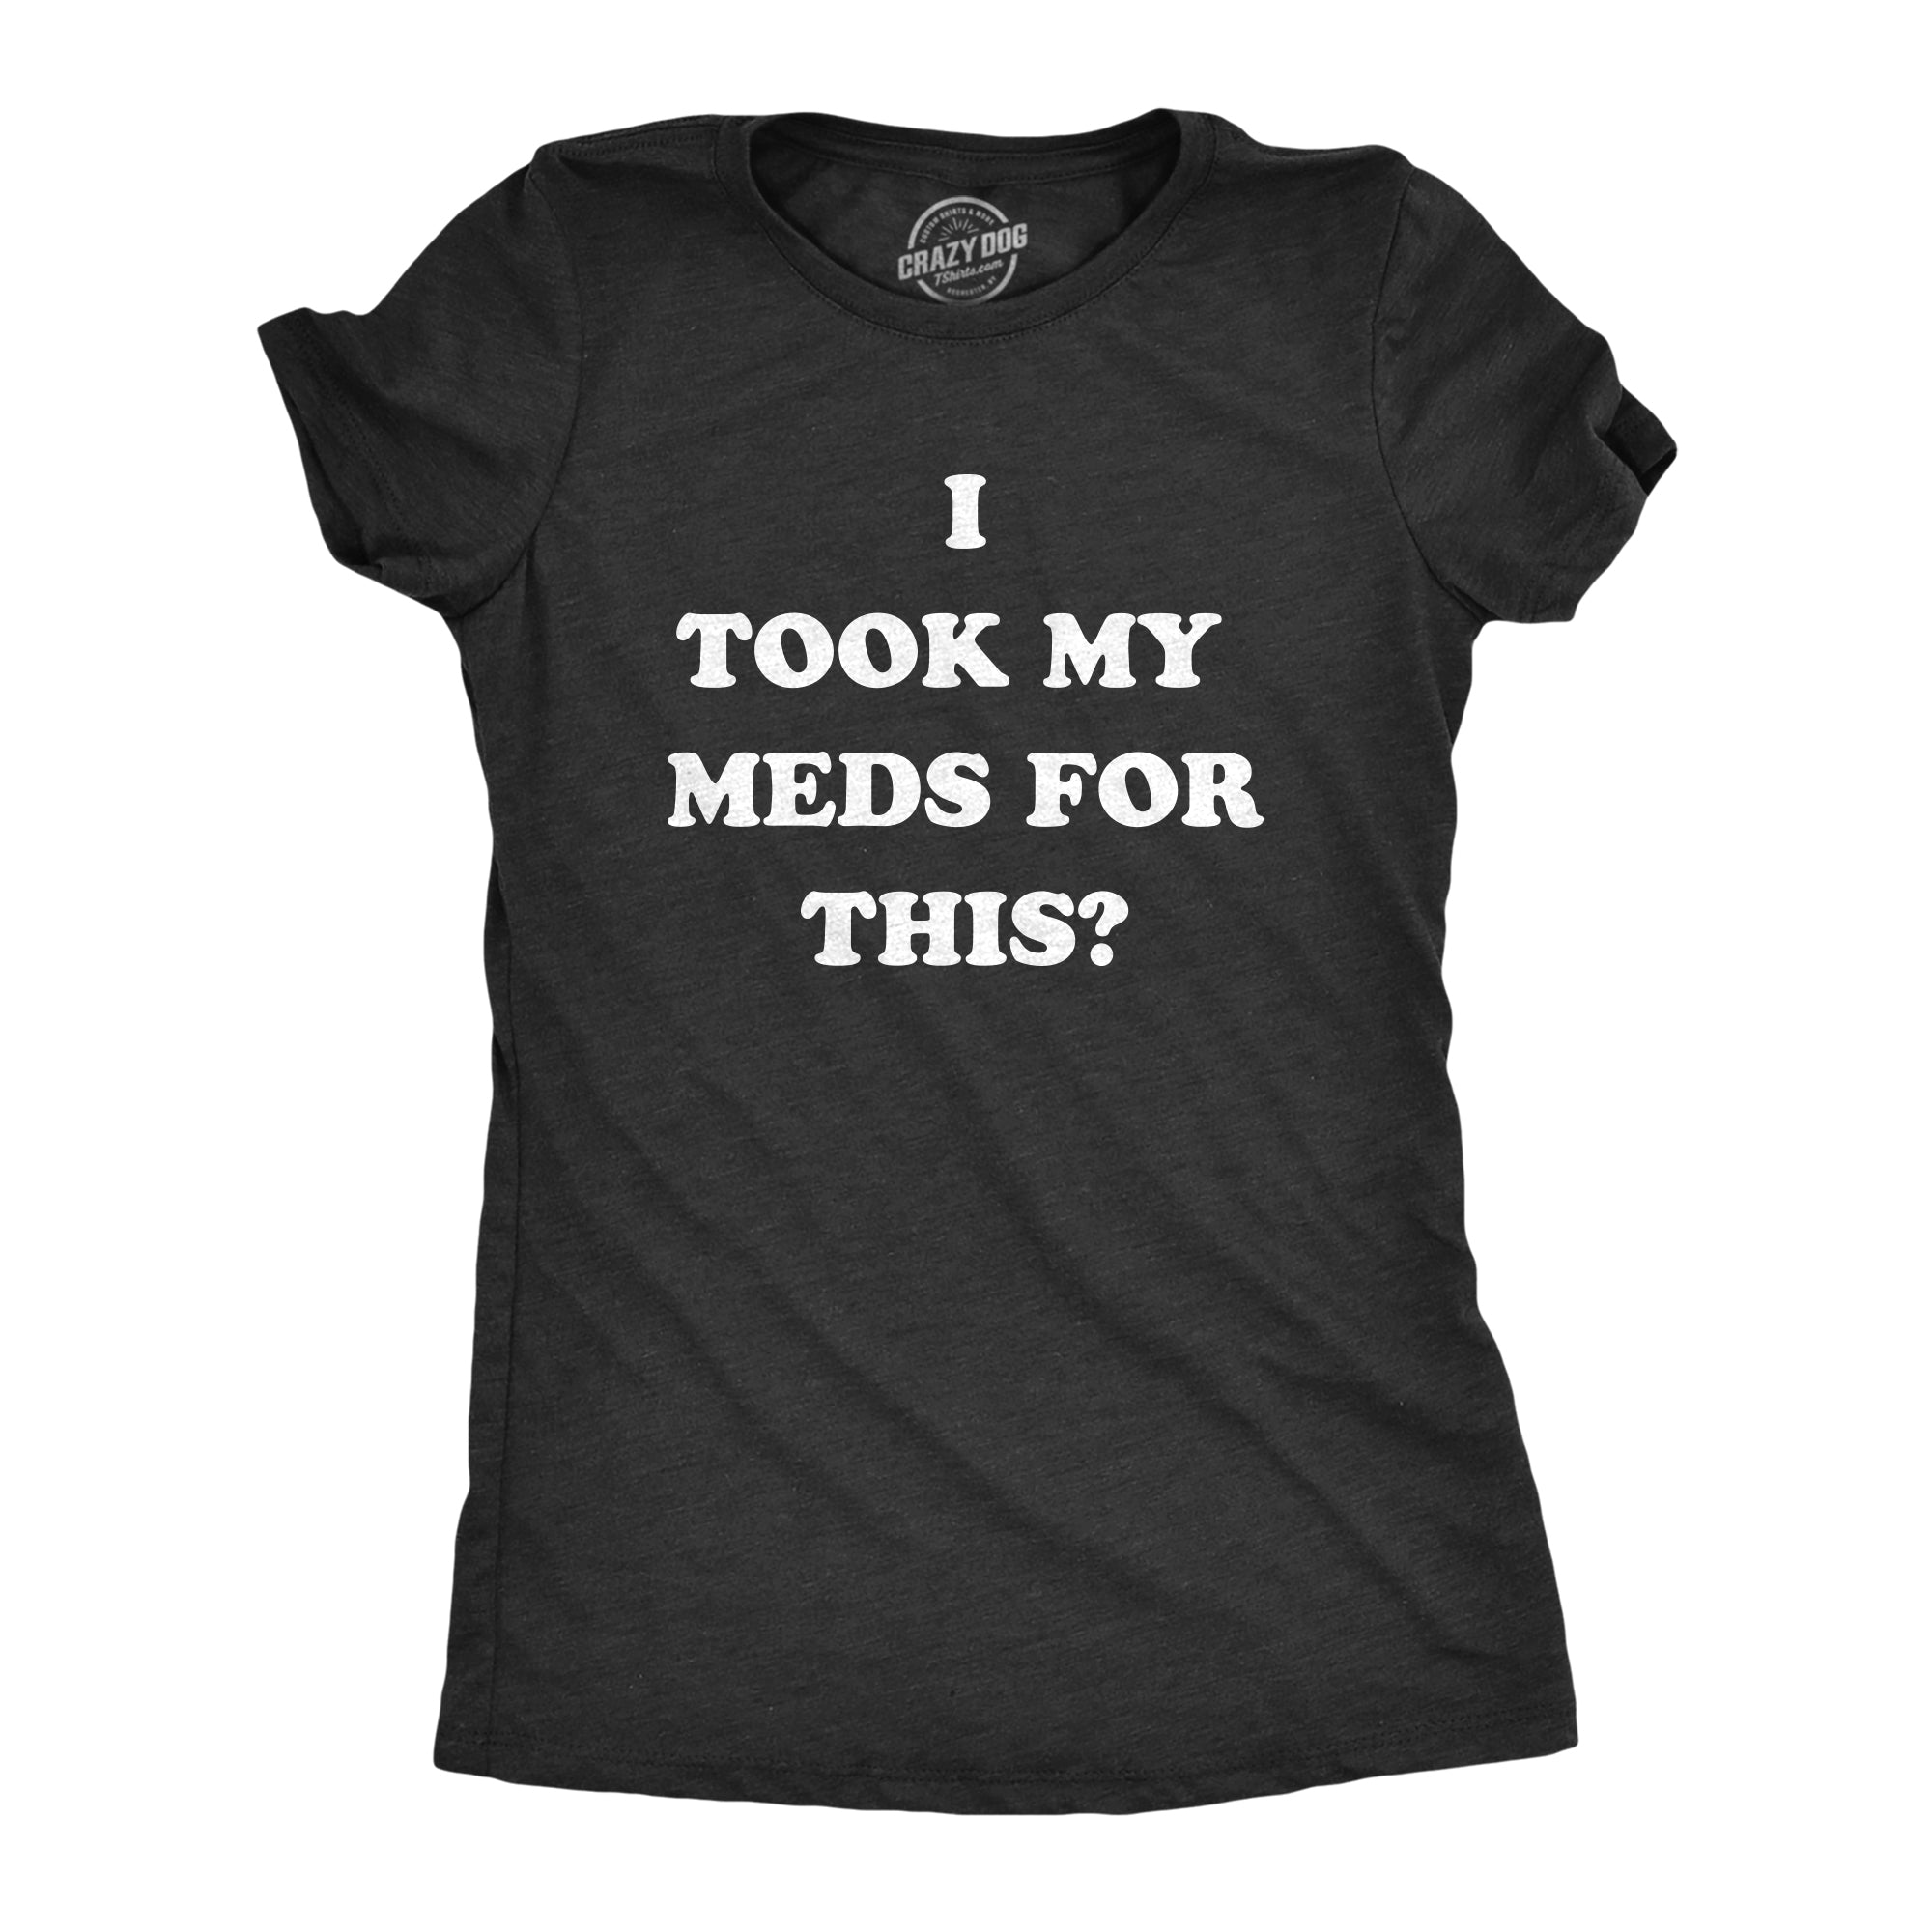 Funny Heather Black - MEDS I Took My Meds For This Womens T Shirt Nerdy Sarcastic Tee